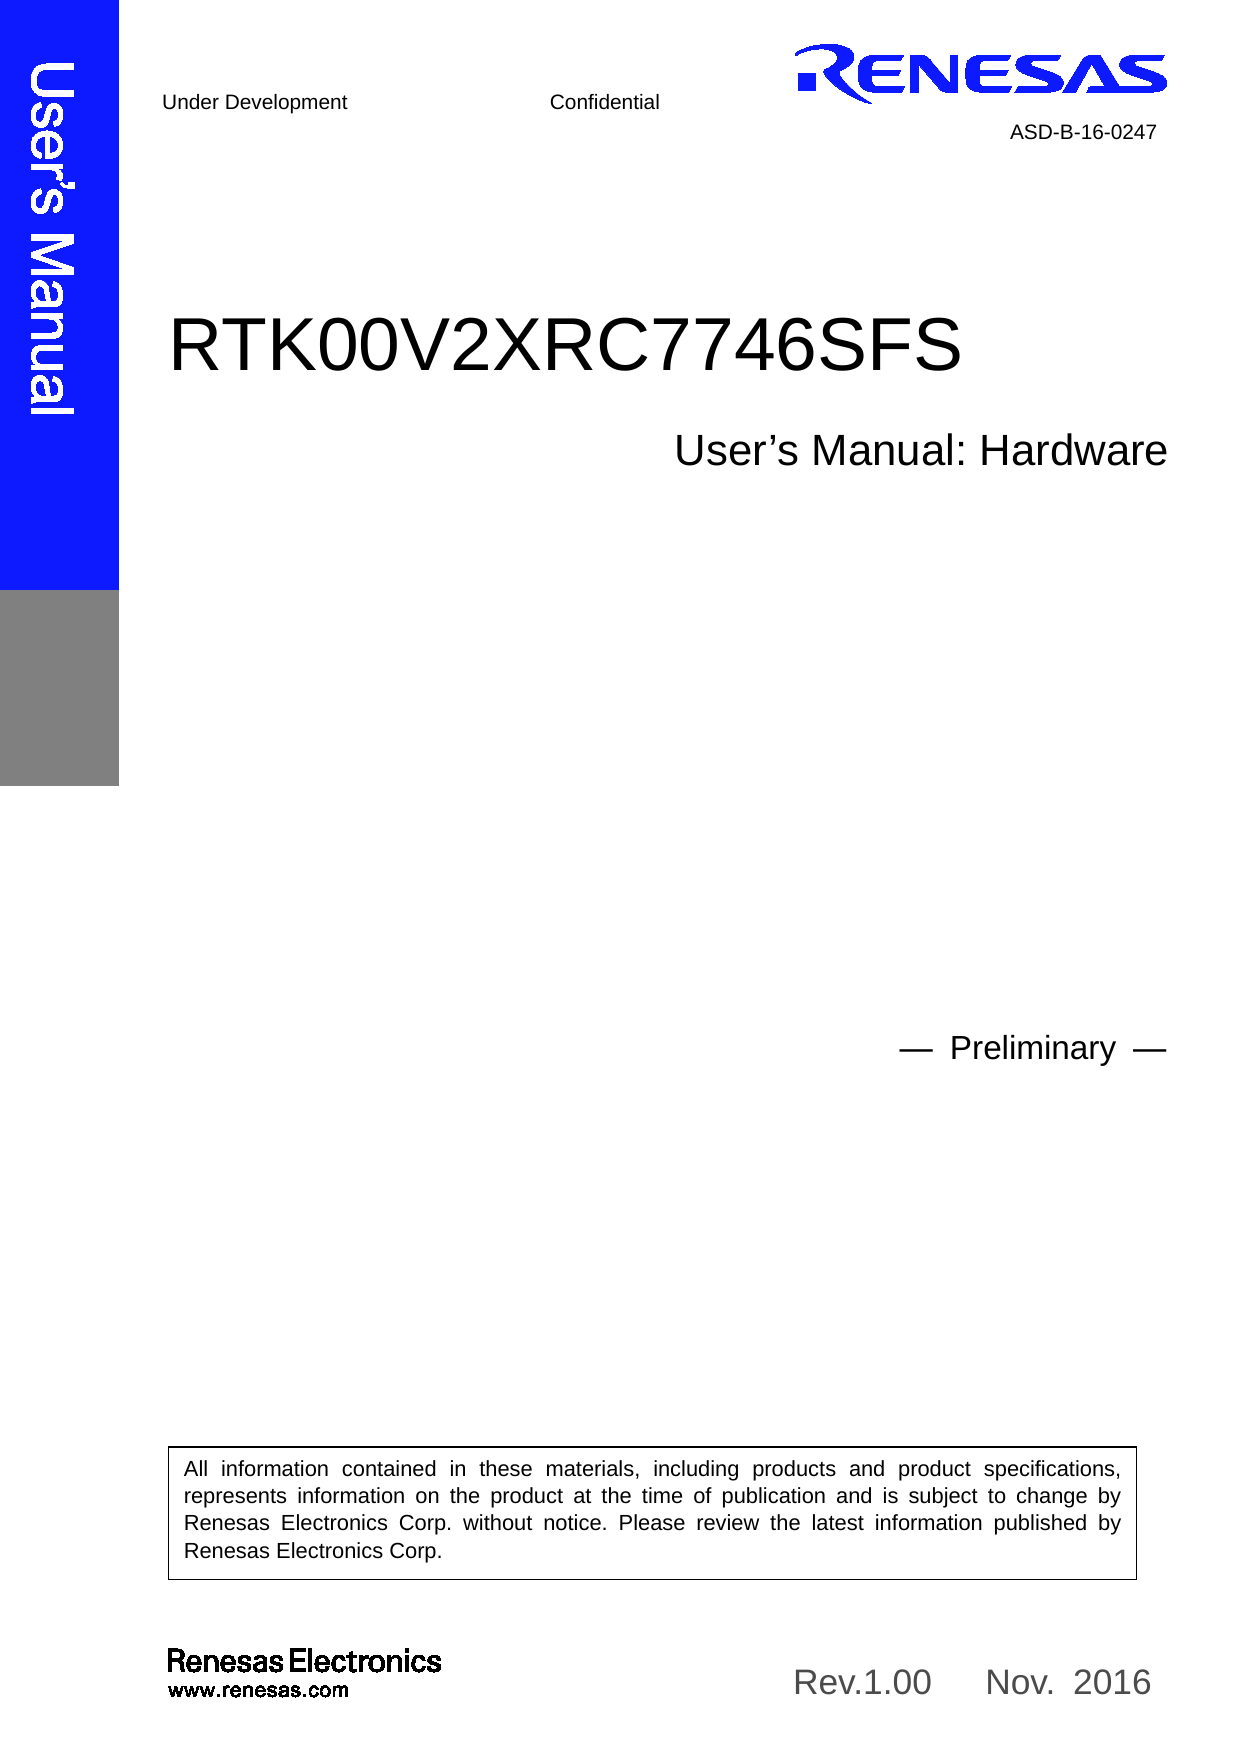     All information contained in these materials, including products and product specifications, represents information on the product at the time of publication and is subject to change by Renesas Electronics Corp. without notice. Please review the latest information published by Renesas Electronics Corp.                              RTK00V2XRC7746SFS  User’s Manual: Hardware Rev.1.00   Nov. 2016  ― Preliminary  ―   Under Development Confidential ASD-B-16-0247 